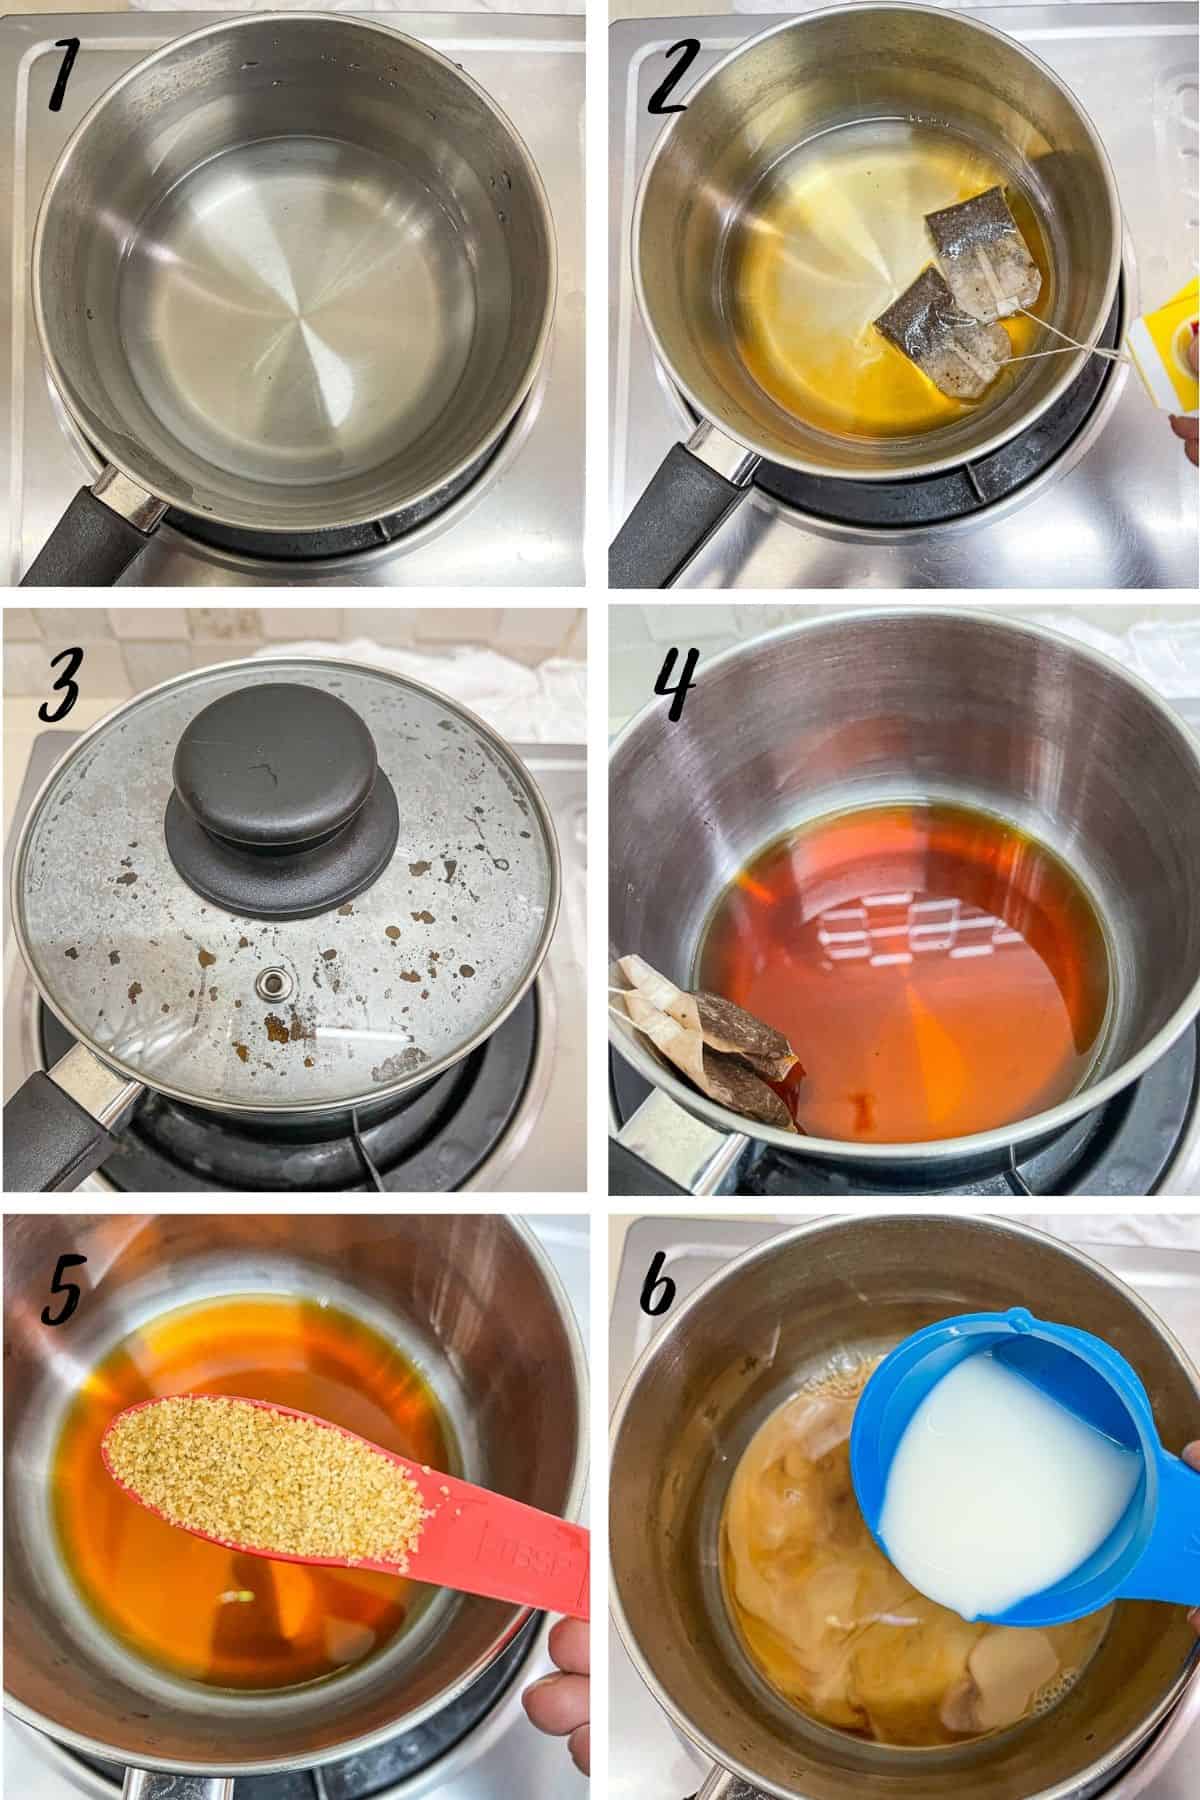 A poster of 6 images showing how to make tea.